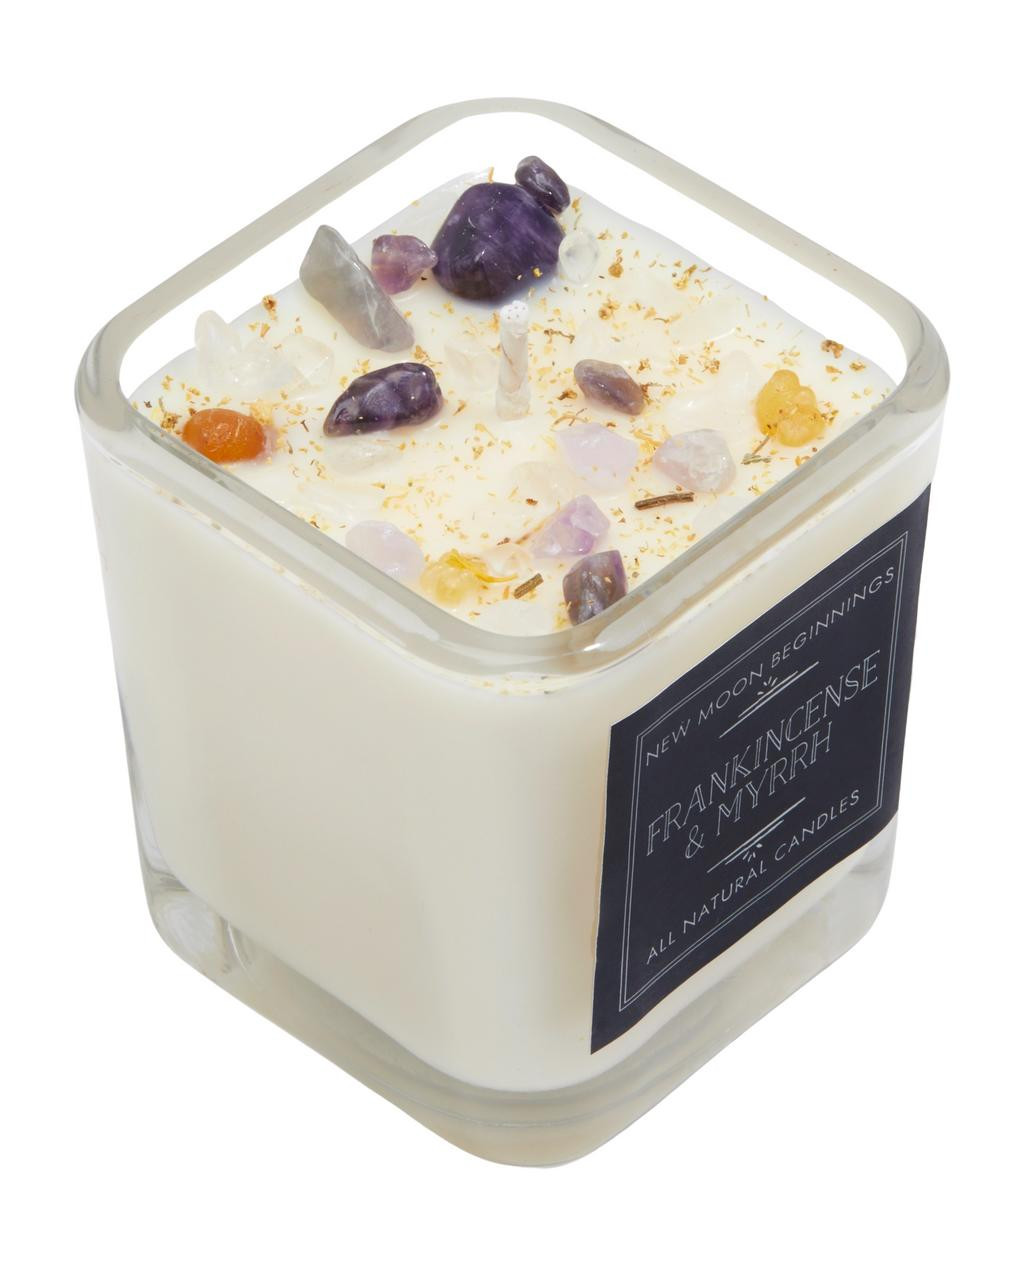 Frankincense Candle – aromaandrosescandle